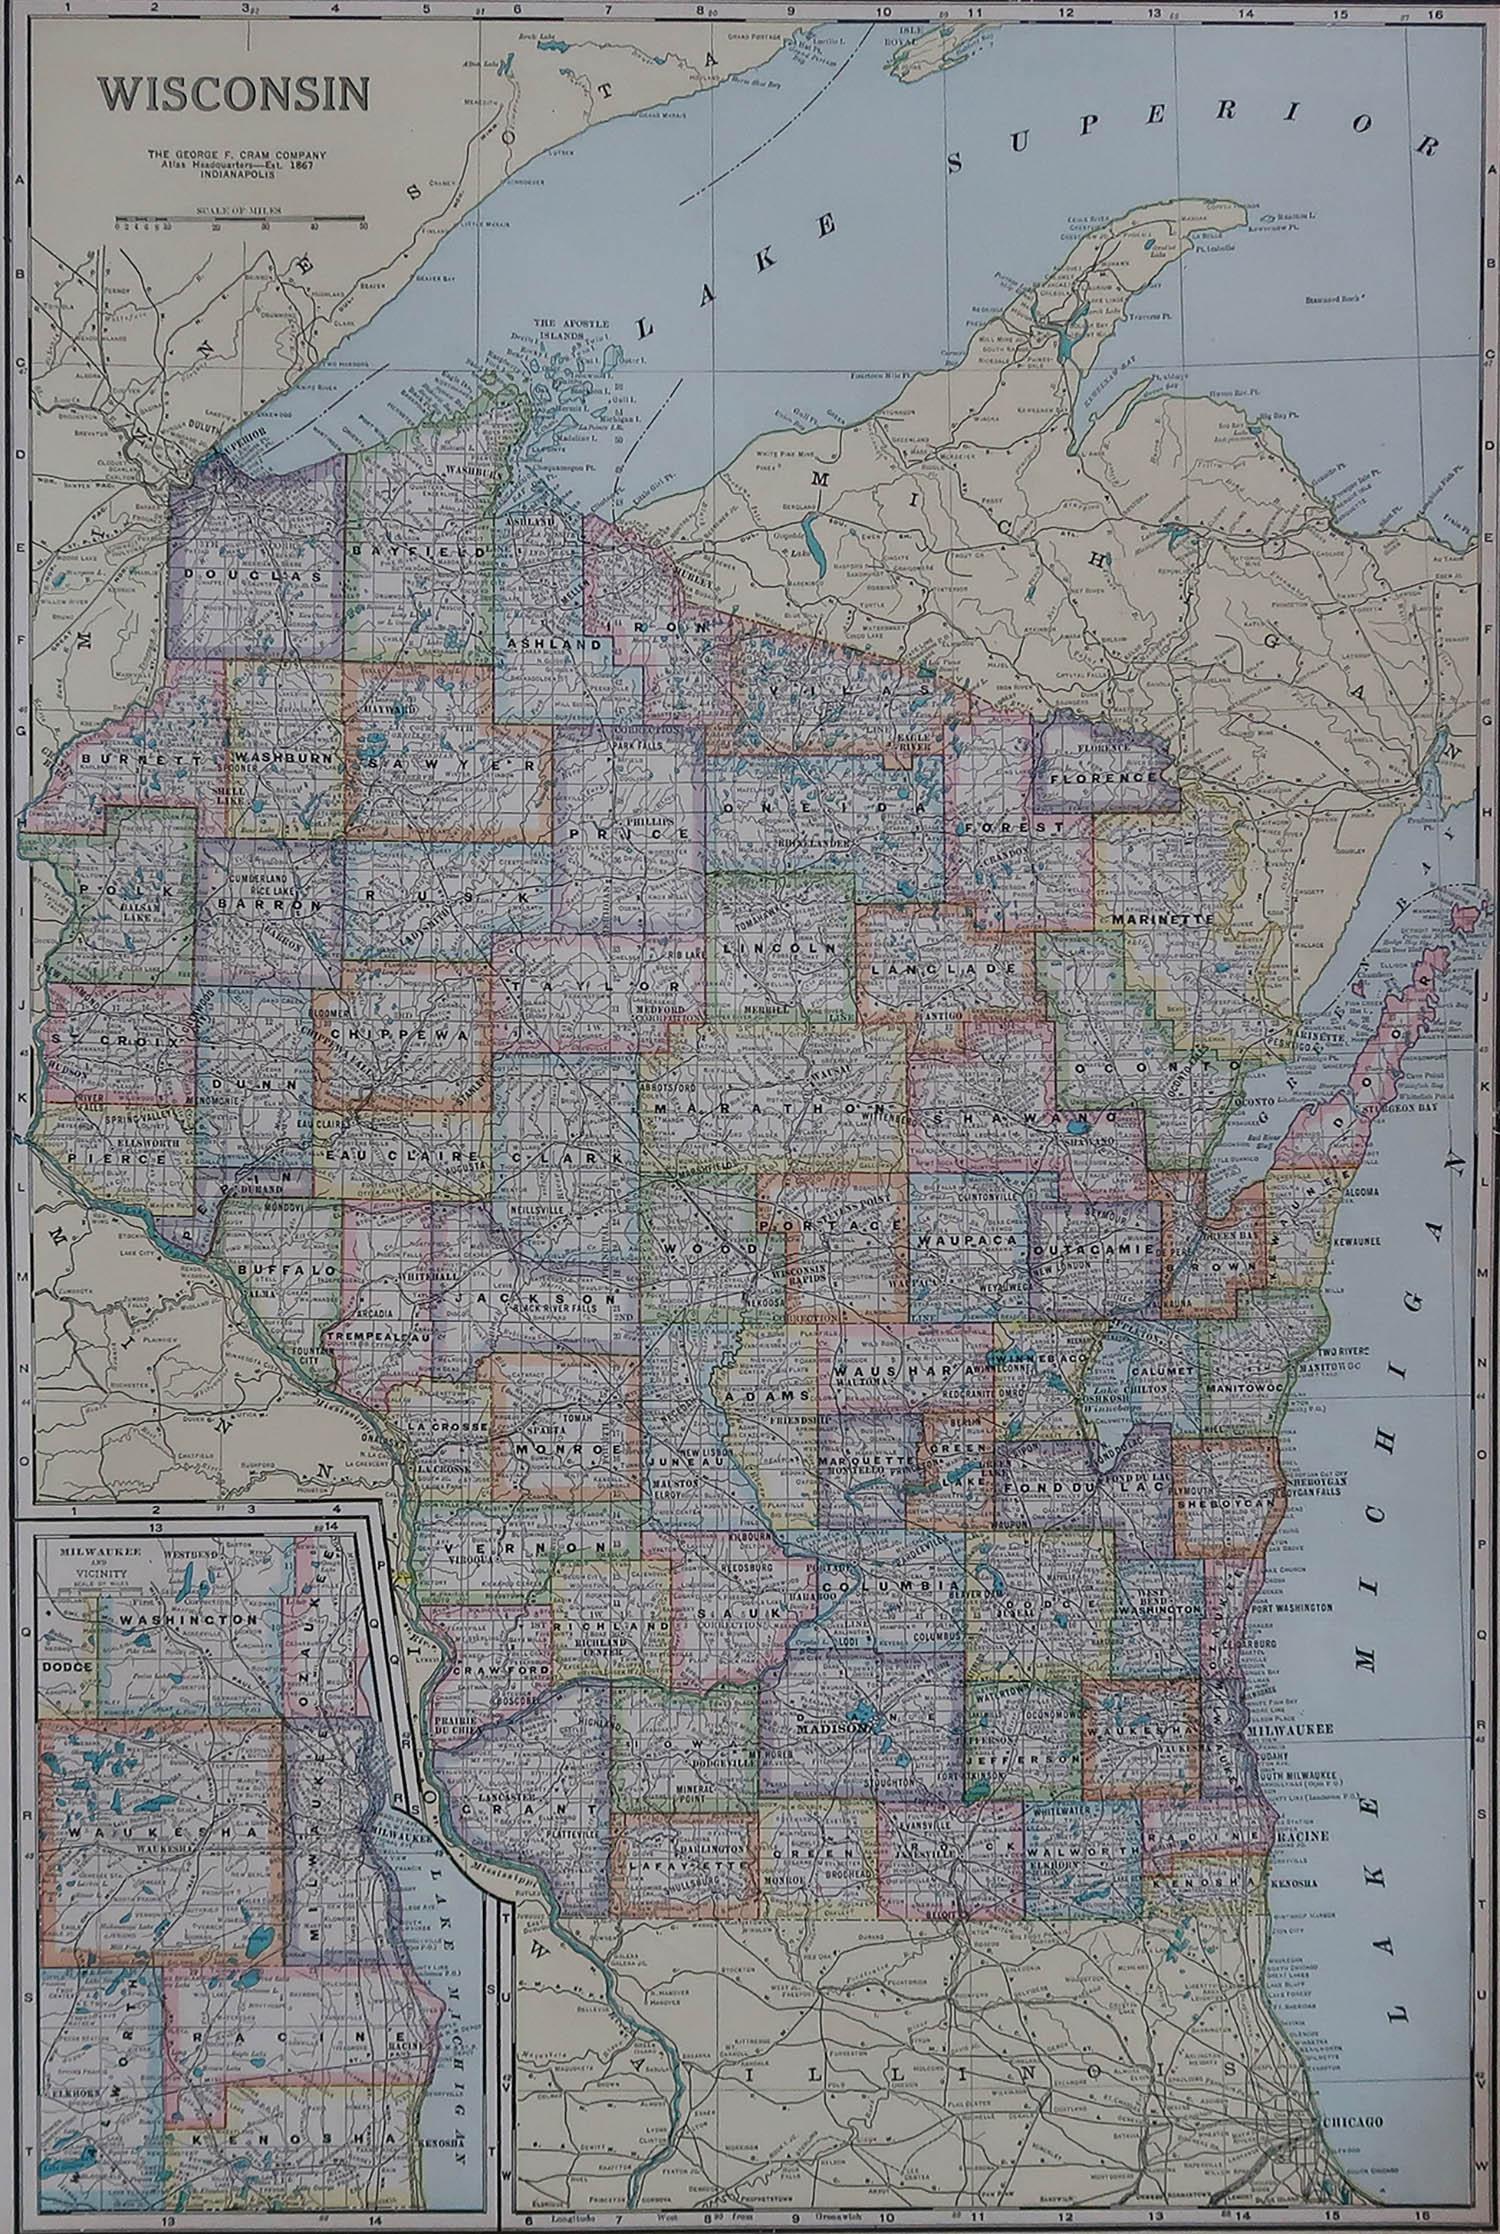 Fabulous map of Wisconsin

Original color

Engraved and printed by the George F. Cram Company, Indianapolis.

Published, circa 1900

Unframed



 